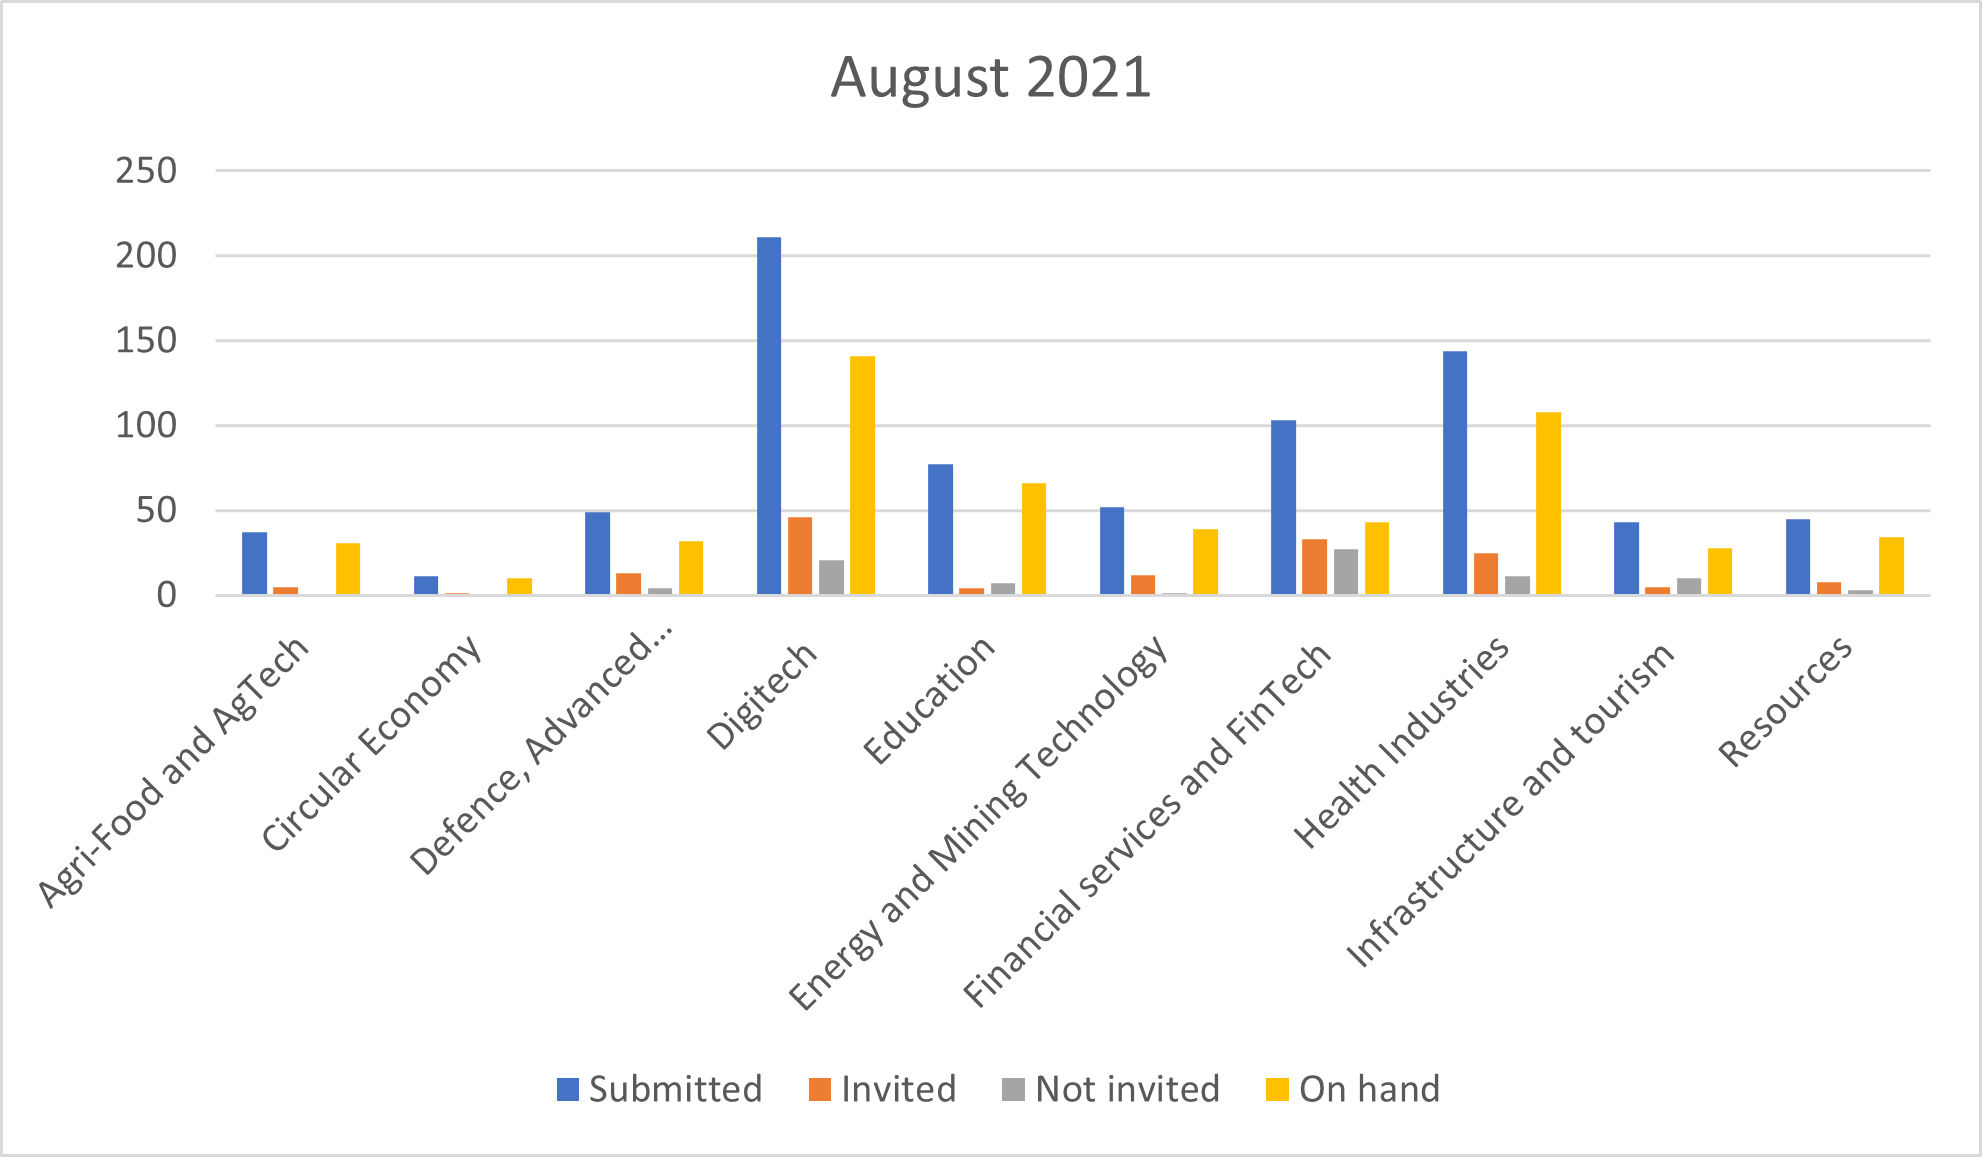 Number of EOIs on hand invited and submitted for global Talent Visa program until August 2021